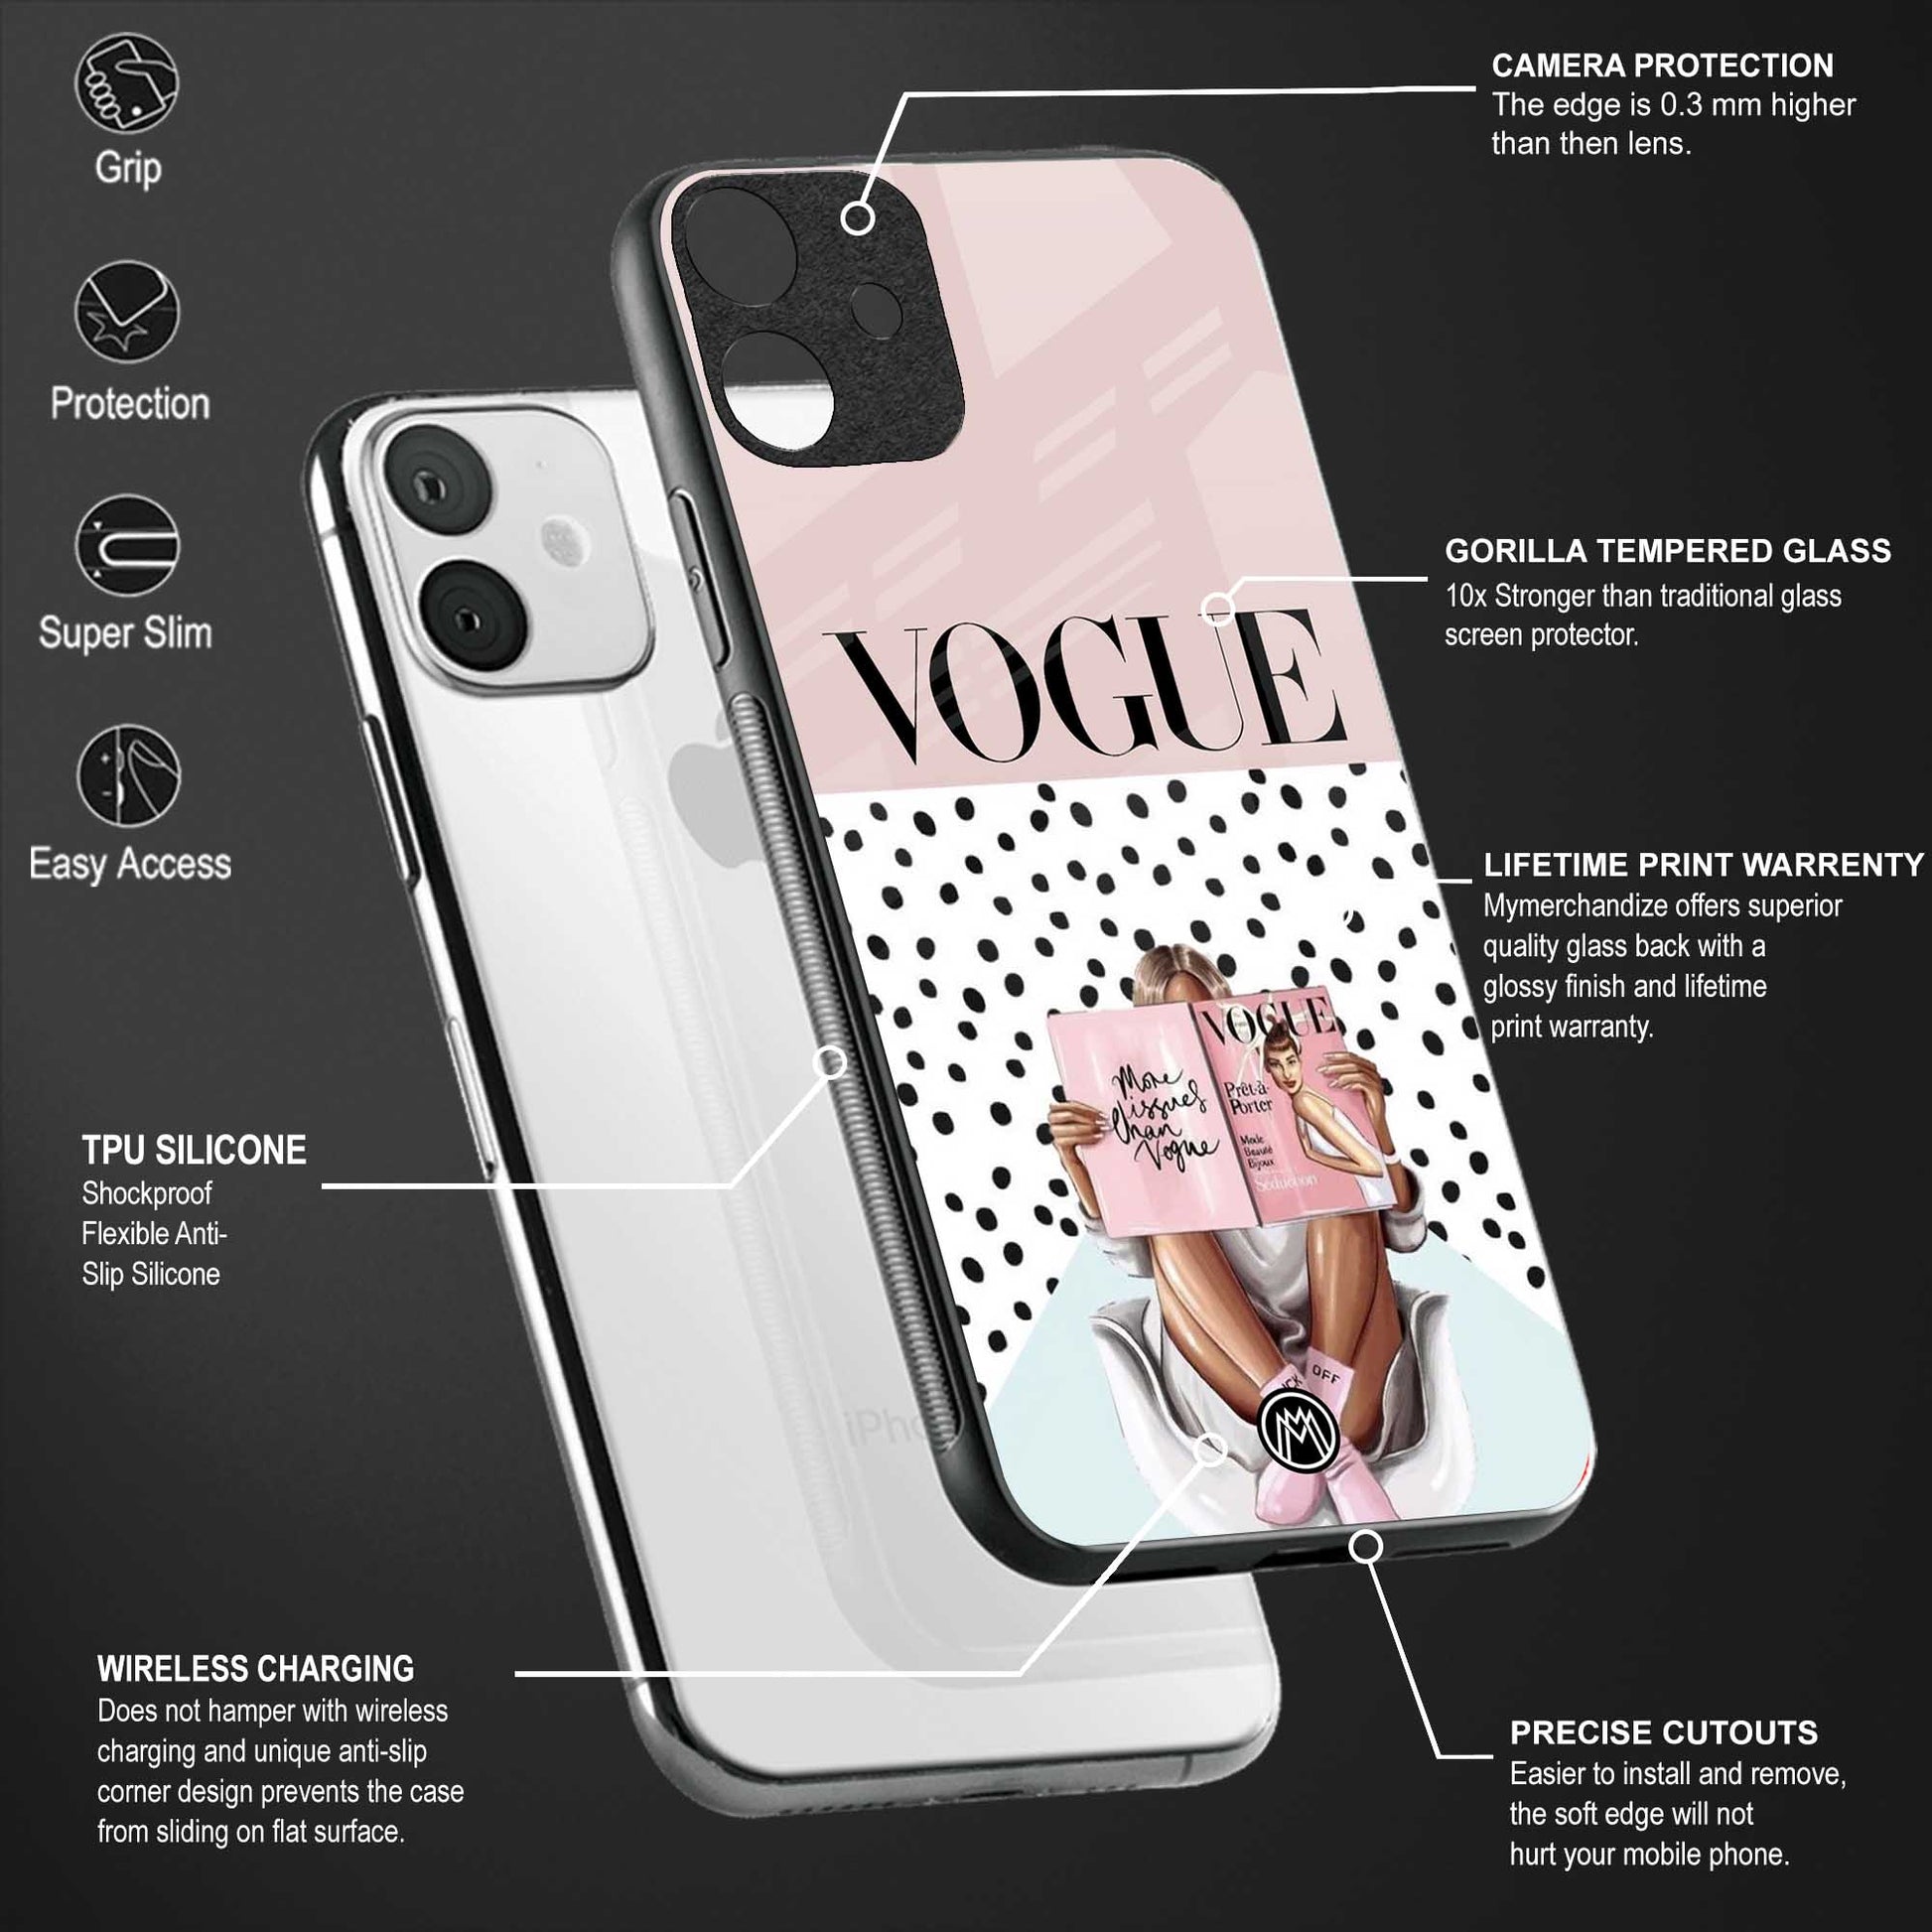 vogue queen glass case for redmi note 7 pro image-4